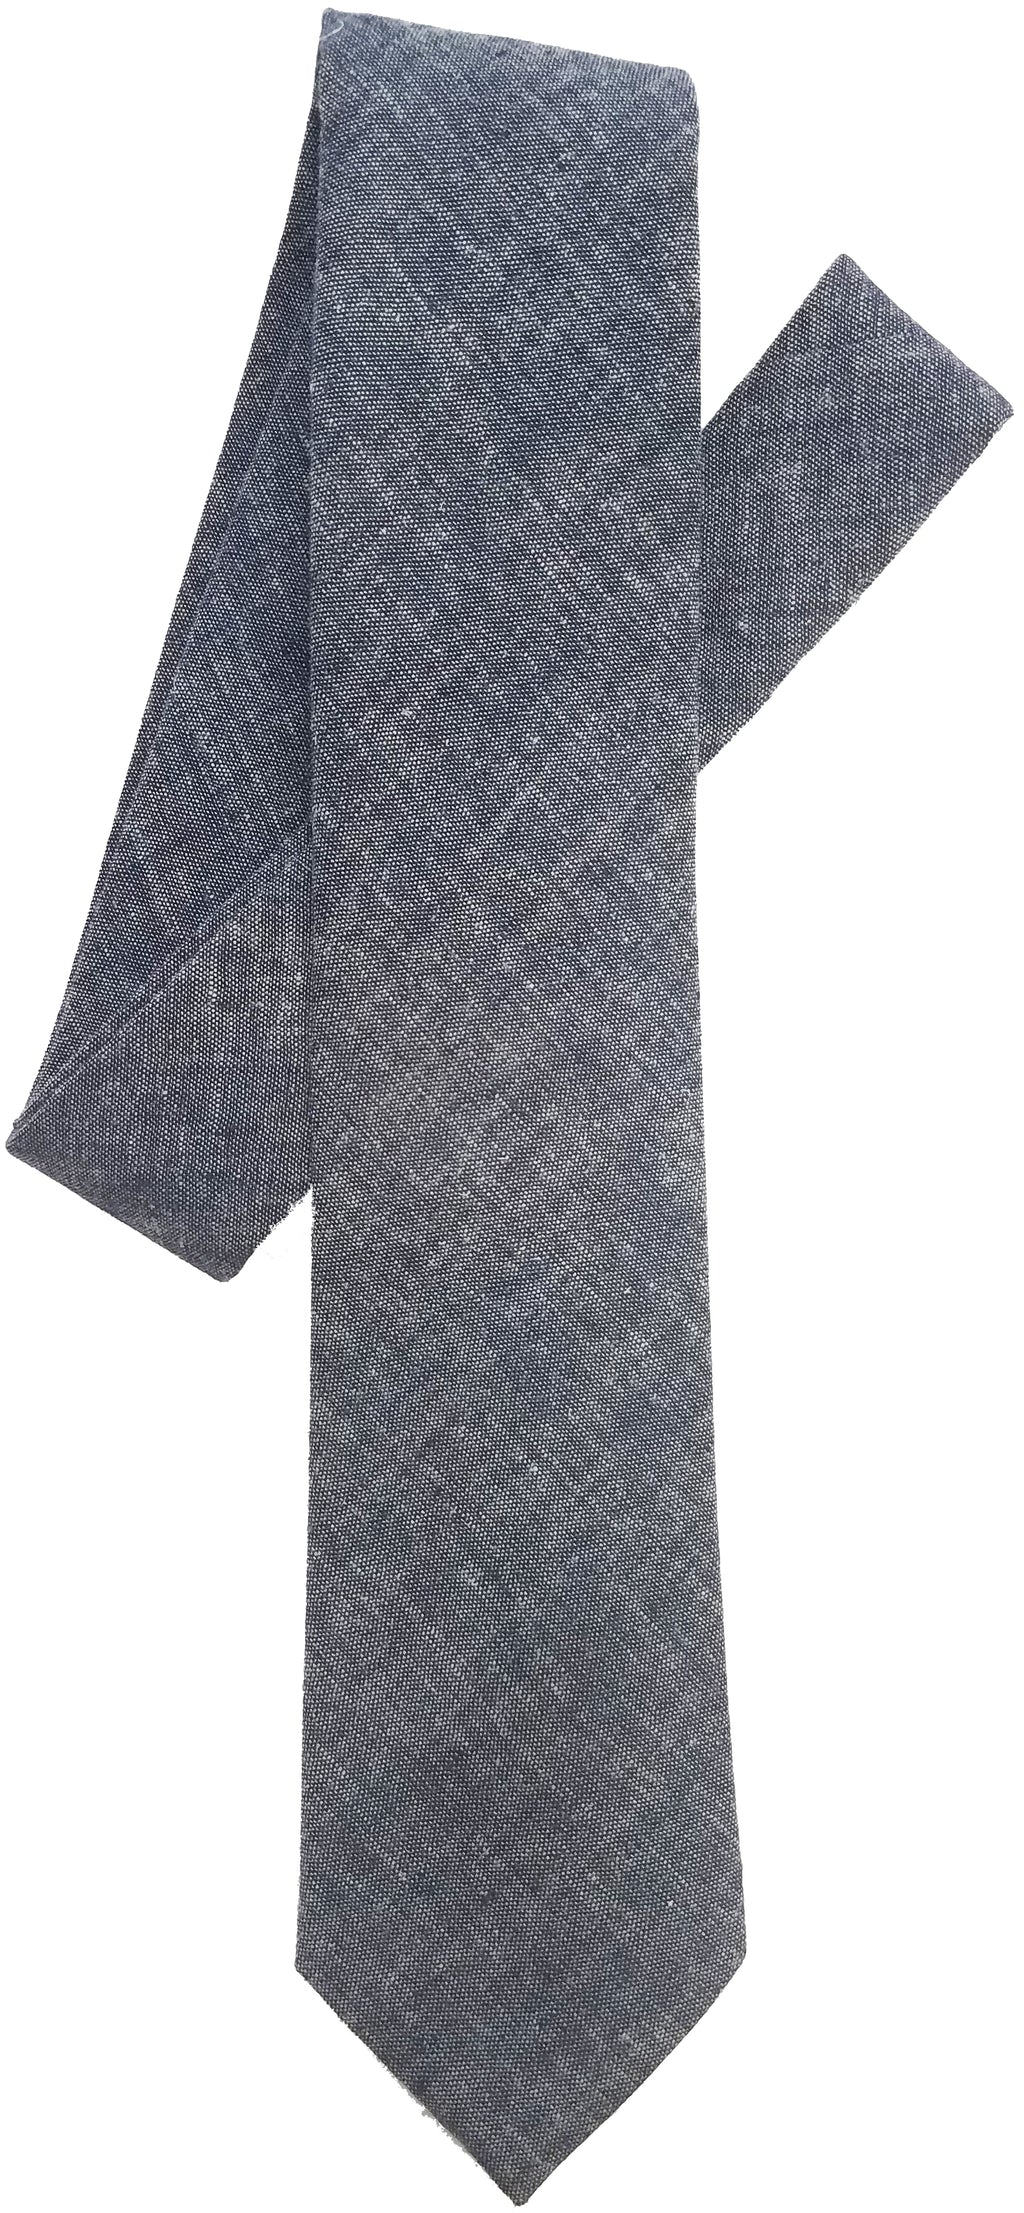 japanese chambray tie